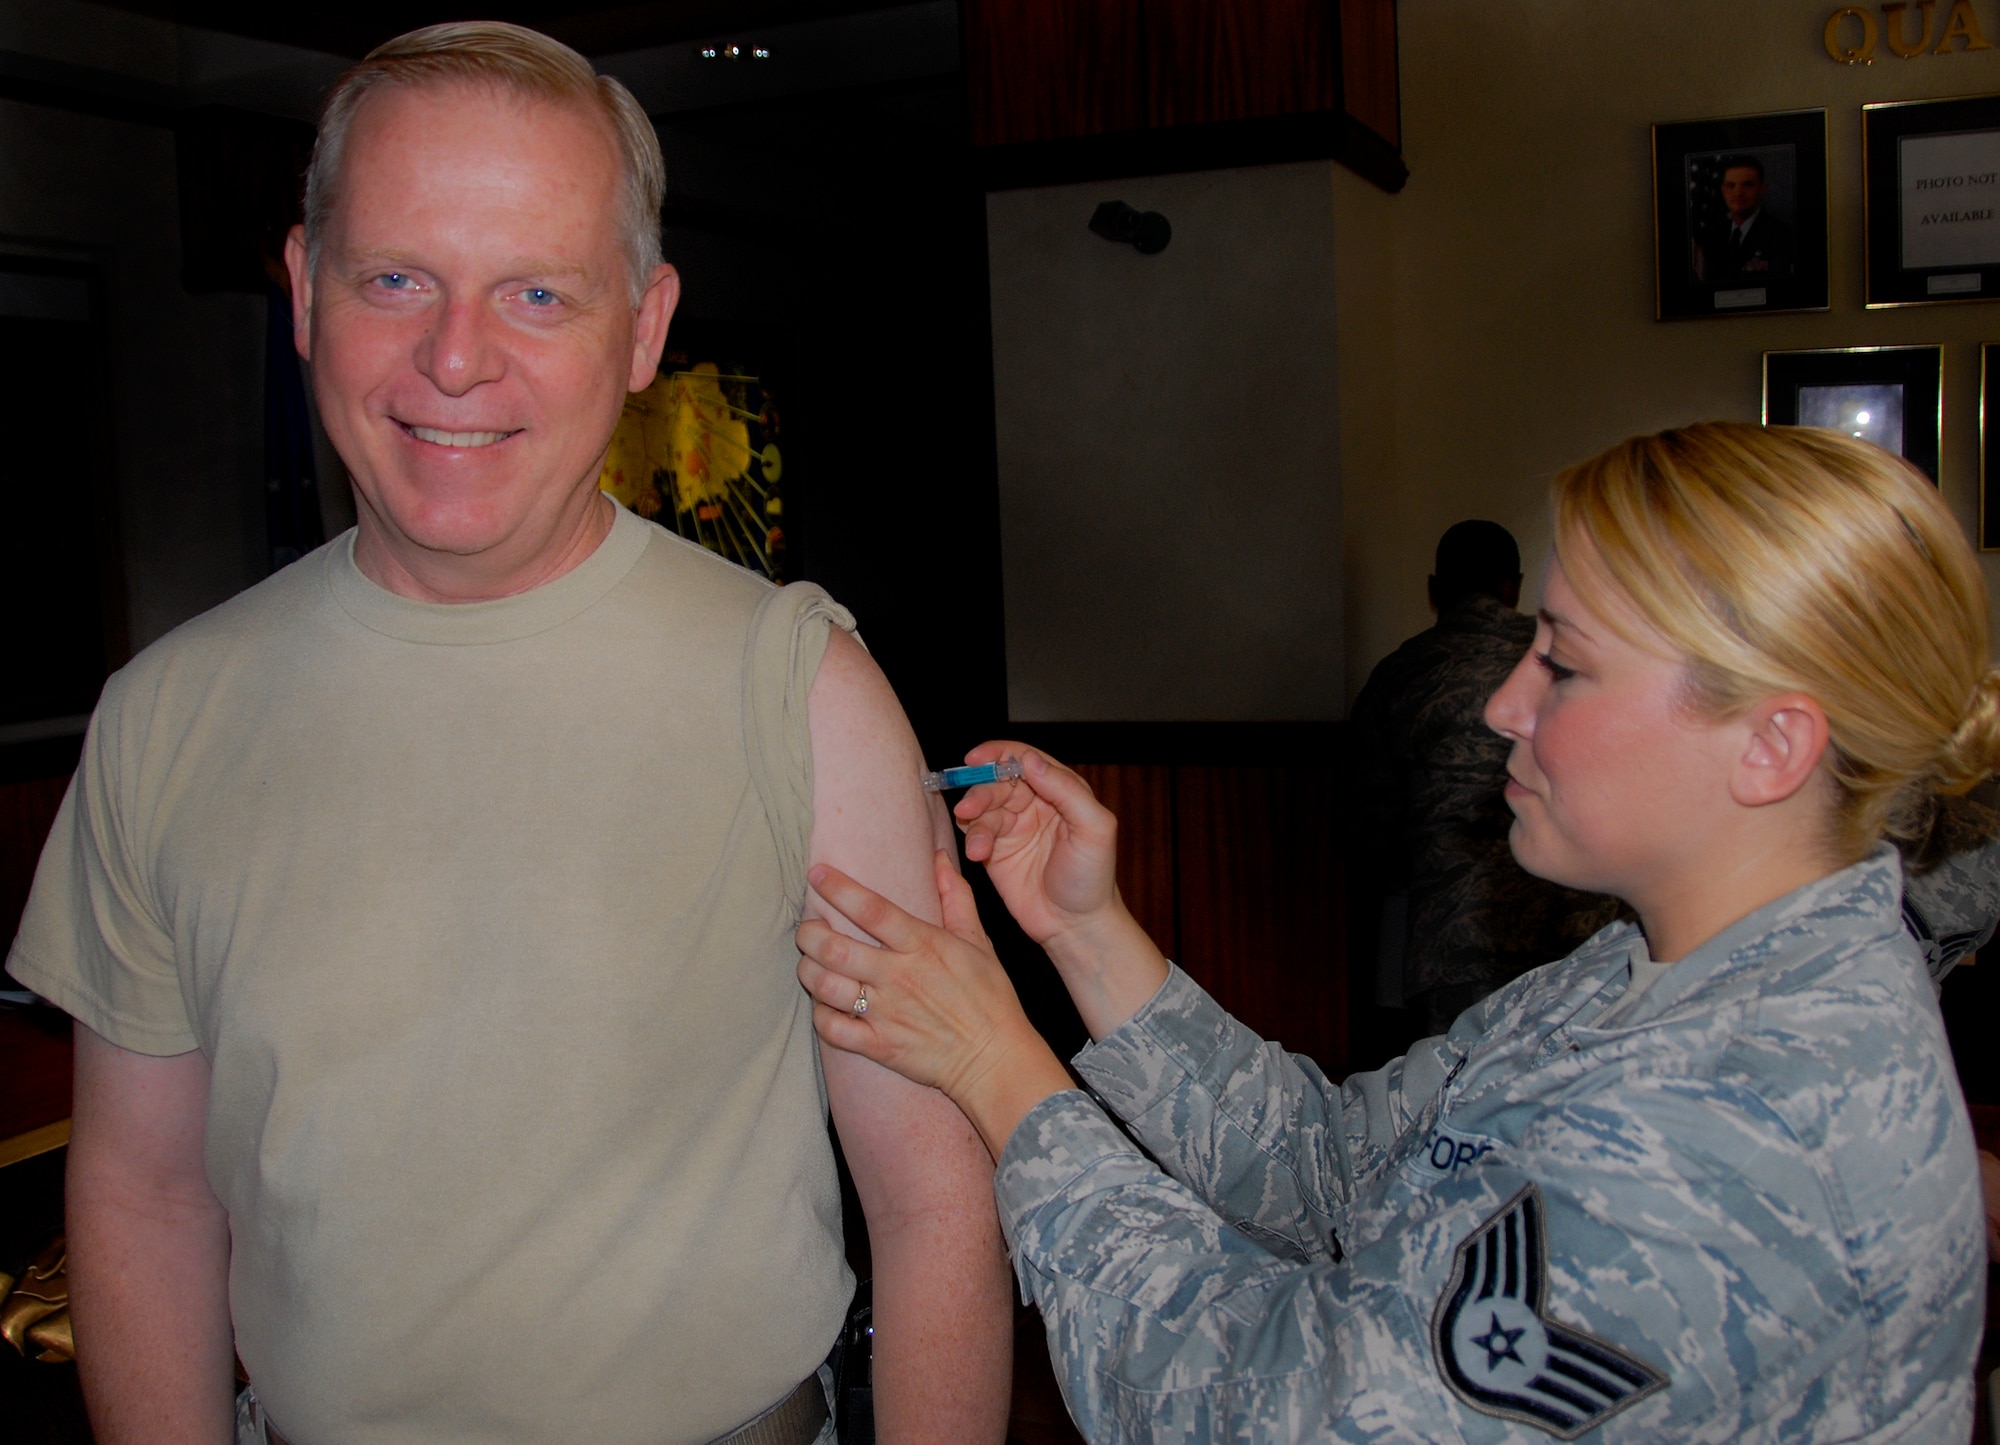 Brig. Gen. David Harris, the 96th Test Wing commander, receives his annual flu vaccination Sept. 19 at Eglin Air Force Base, Fla.  A mass influenza vaccination line for military members only is scheduled for Oct. 15 – 18 at the 413th Flight Test Squadron auditorium, building 439 (formerly the 9th SOS Auditorium) from 6 a.m. to 6 p.m. and will be on a first-come, first-served basis. The auditorium is located on West F Avenue, across from the library on the East side of the base.  (U.S. Air Force photo/Kevin Gaddie)